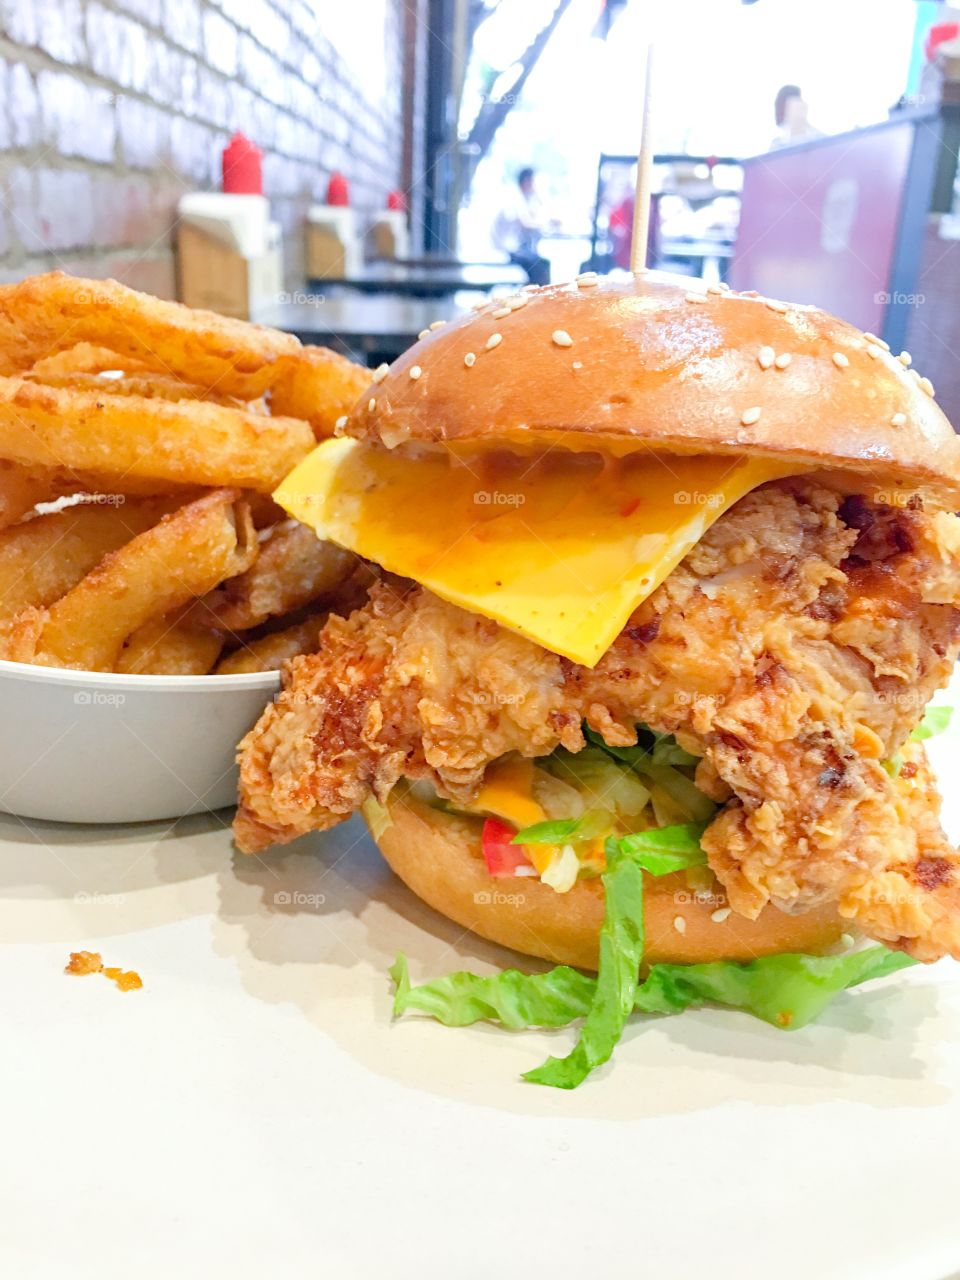 Southern fried chicken burger and onion rings